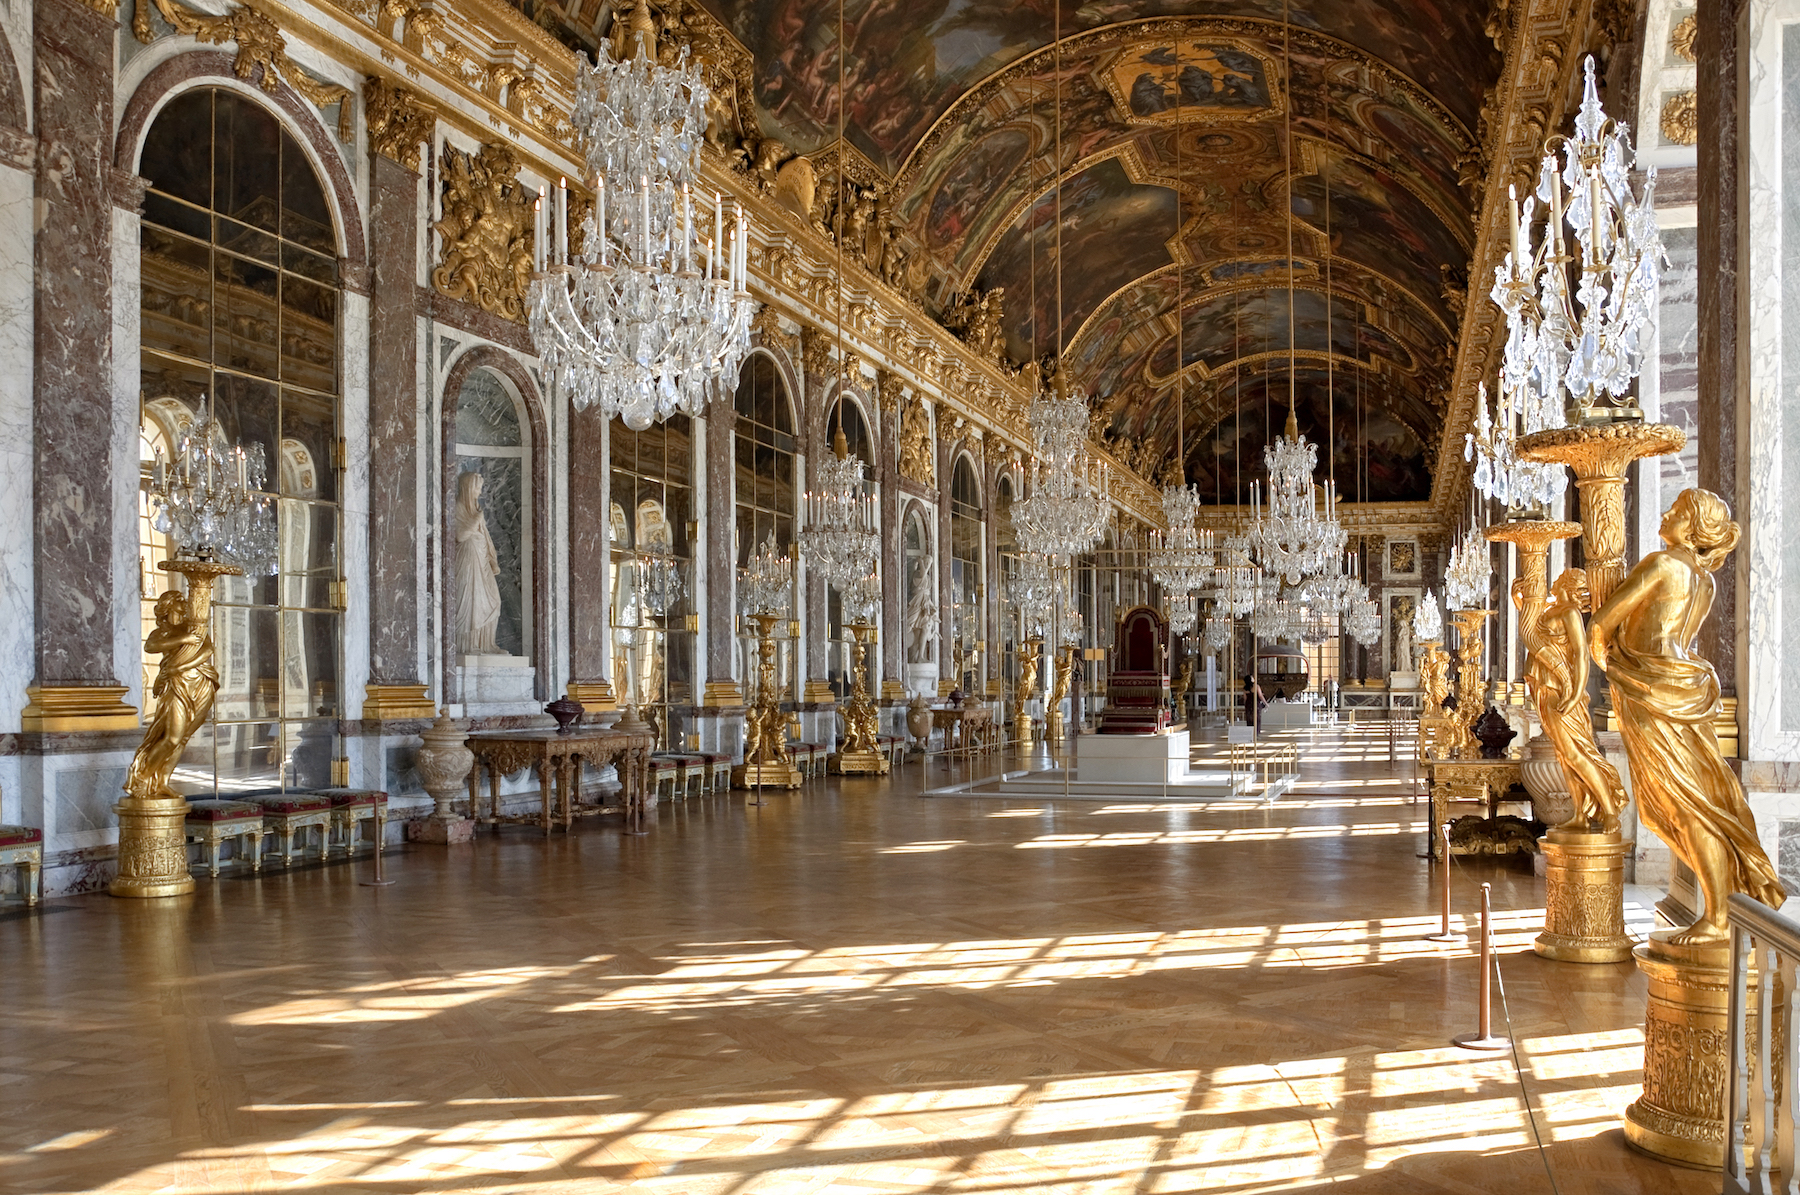 Garden-facing windows parallel mirrors in the Galerie des glaces (Hall of Mirrors), Palace of Versailles (image: Wikimedia Commons, Myrabella CC BY-SA 3.0)